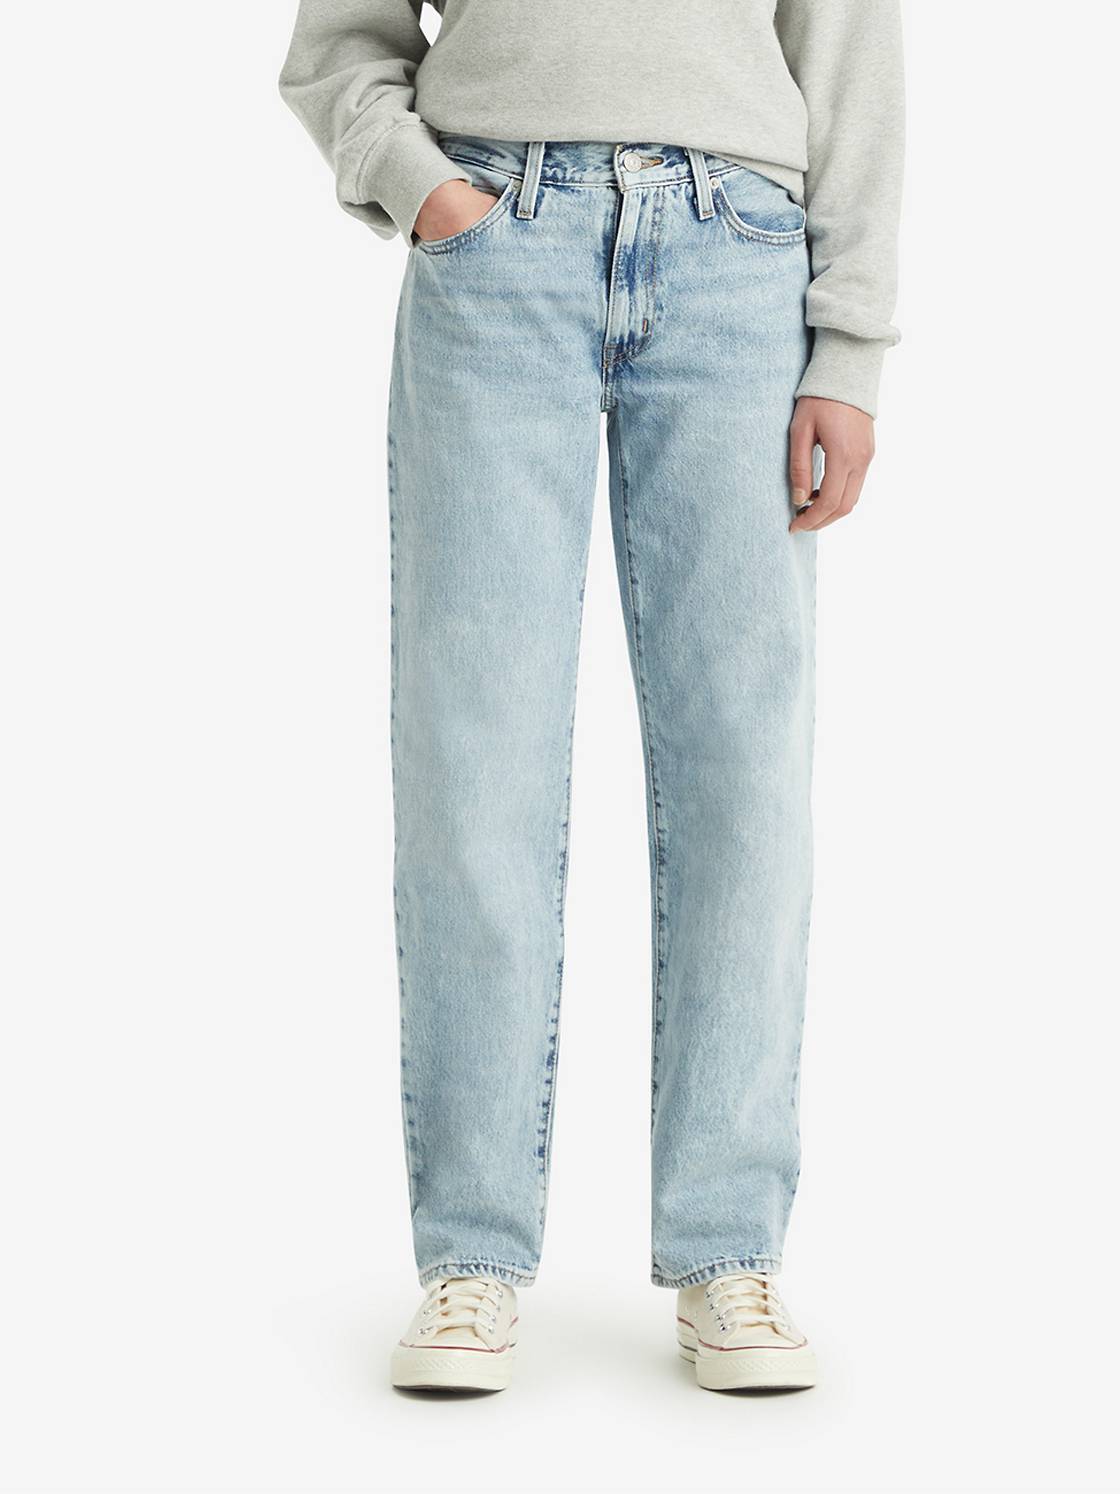 '94 Baggy Jeans 1